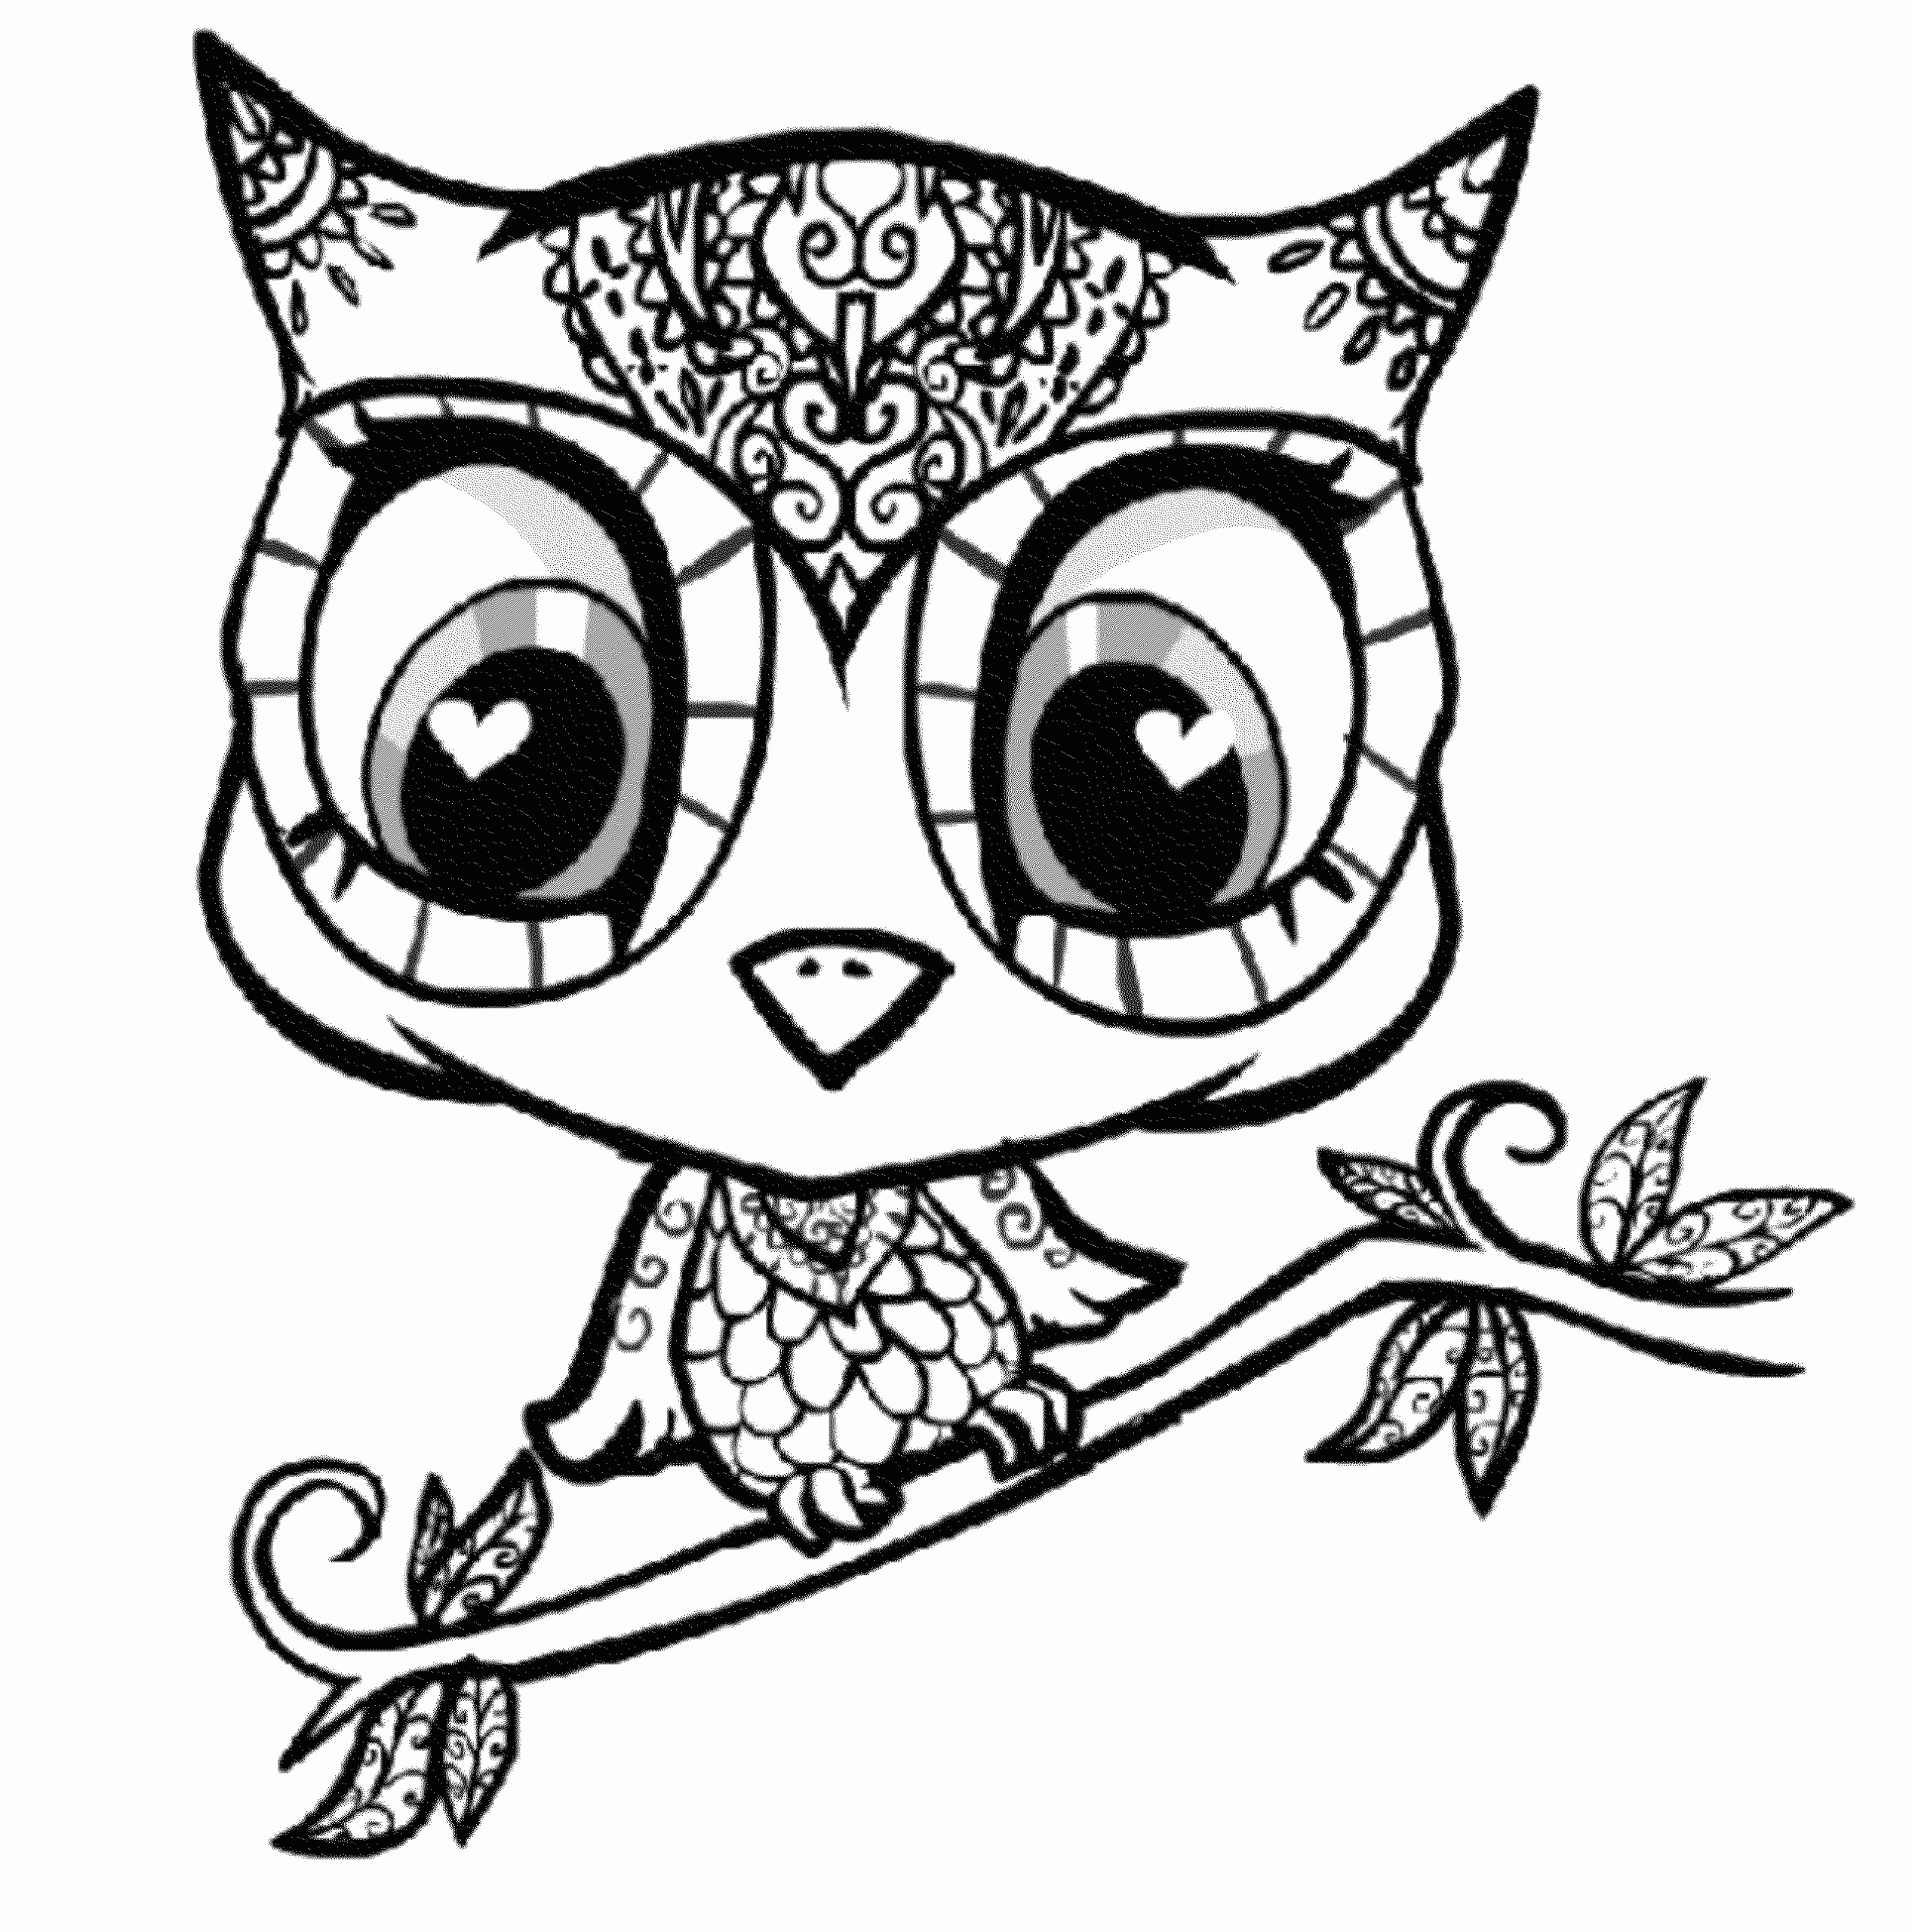 Free Printable Owl Coloring Pages
 Owl Design Drawing at GetDrawings